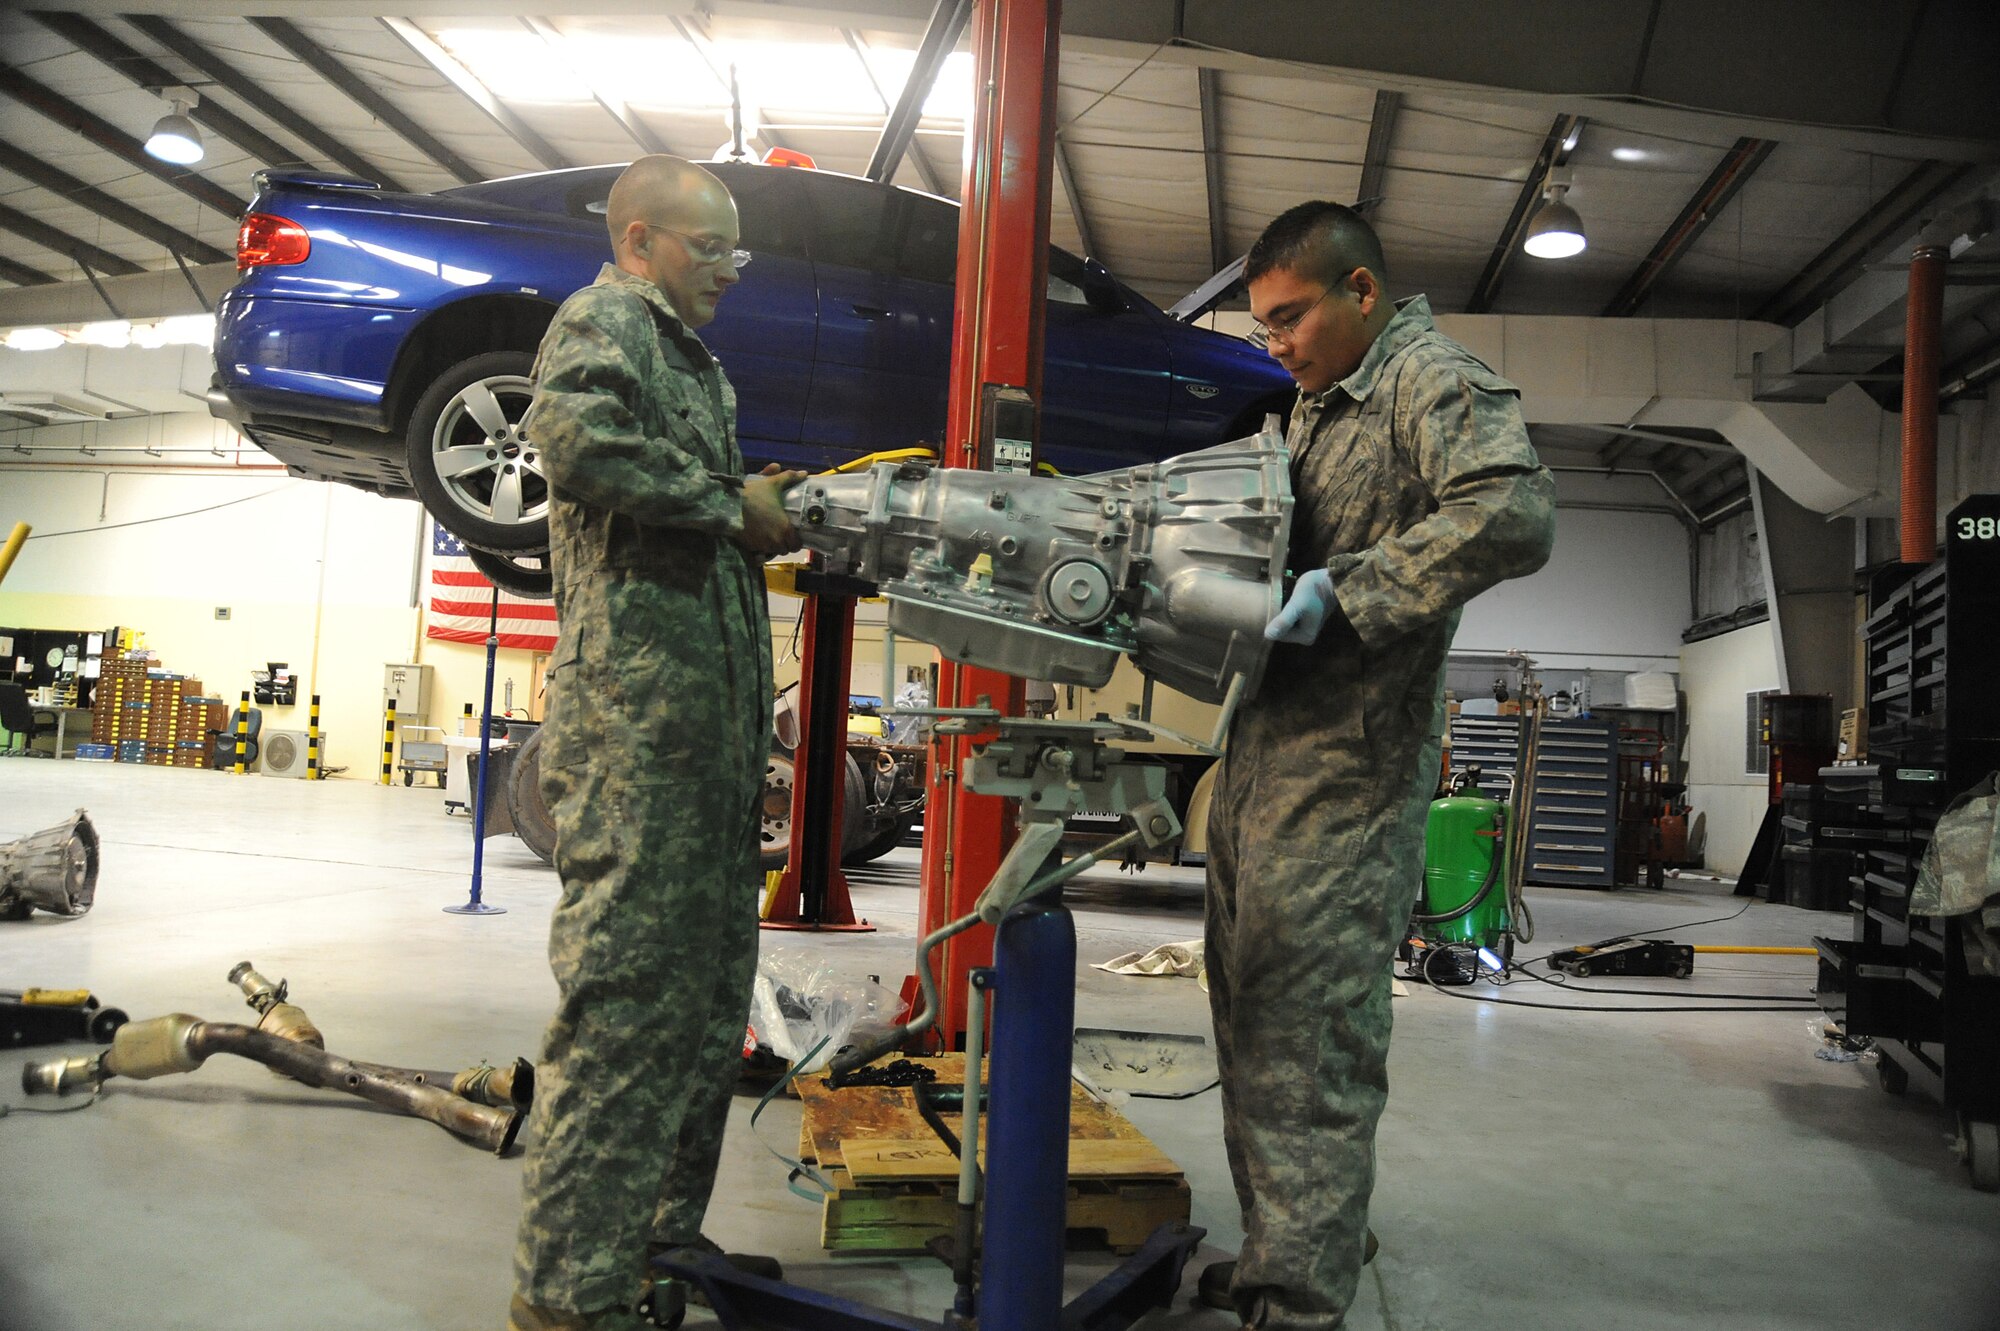 Senior Airman Adam Owens and Senior Airman Michael Jakubec, 380th Expeditionary Logistics Readiness Squadron, vehicle maintenance, lift a transmission onto a transmission jack so that it can be raised into a Pontiac GTO, April 26 at an undisclosed location in Southwest Asia. The GTO is used as a chase car to help guide the U-2 Dragon Lady pilots during take-offs and landings. Airman Owens is deployed from 174th Air National Guard Base, Hancock Field, N.Y. and hails from Binghamton, N.Y. Airman Jakubec is deployed from Kadena AB, Japan and hails from Spanaway Wash.  (U.S. Air Force photo by Senior Airman Brian J. Ellis) (Released)